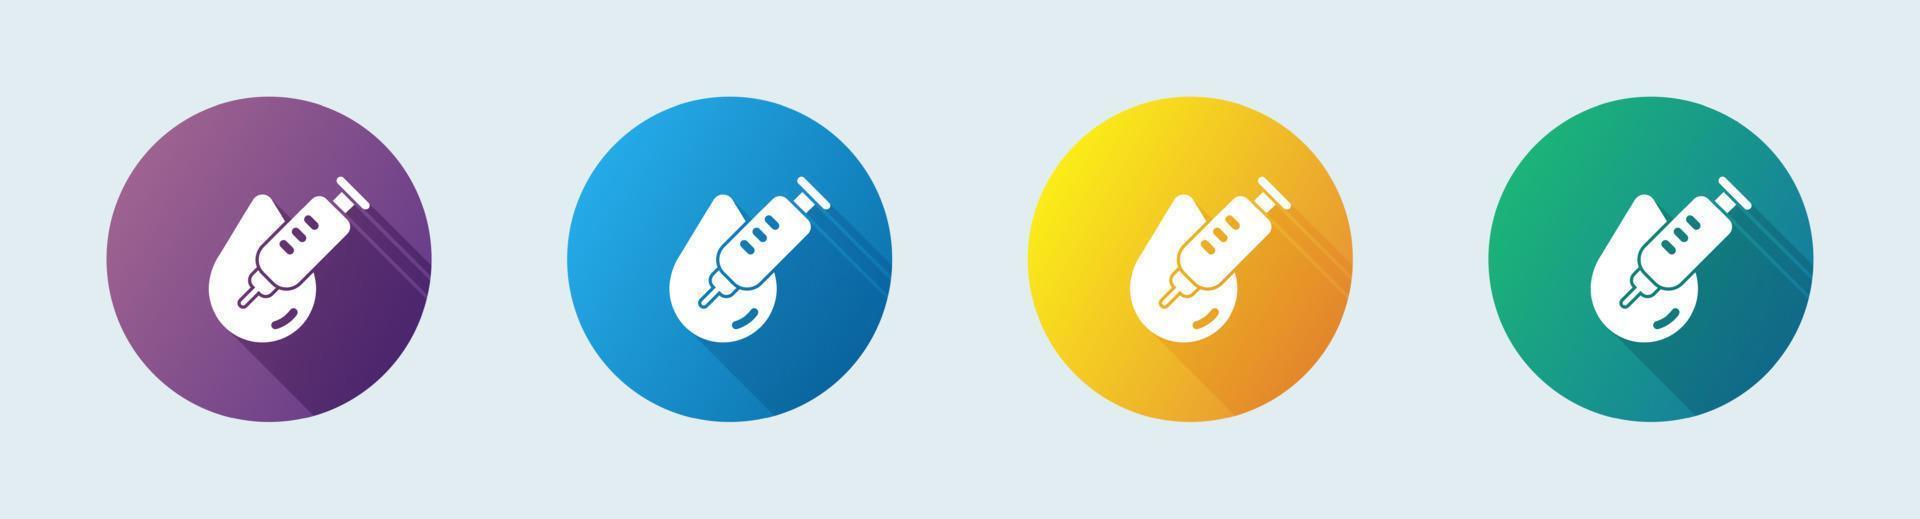 Inject solid icon in flat design style. Medicine signs vector illustration.